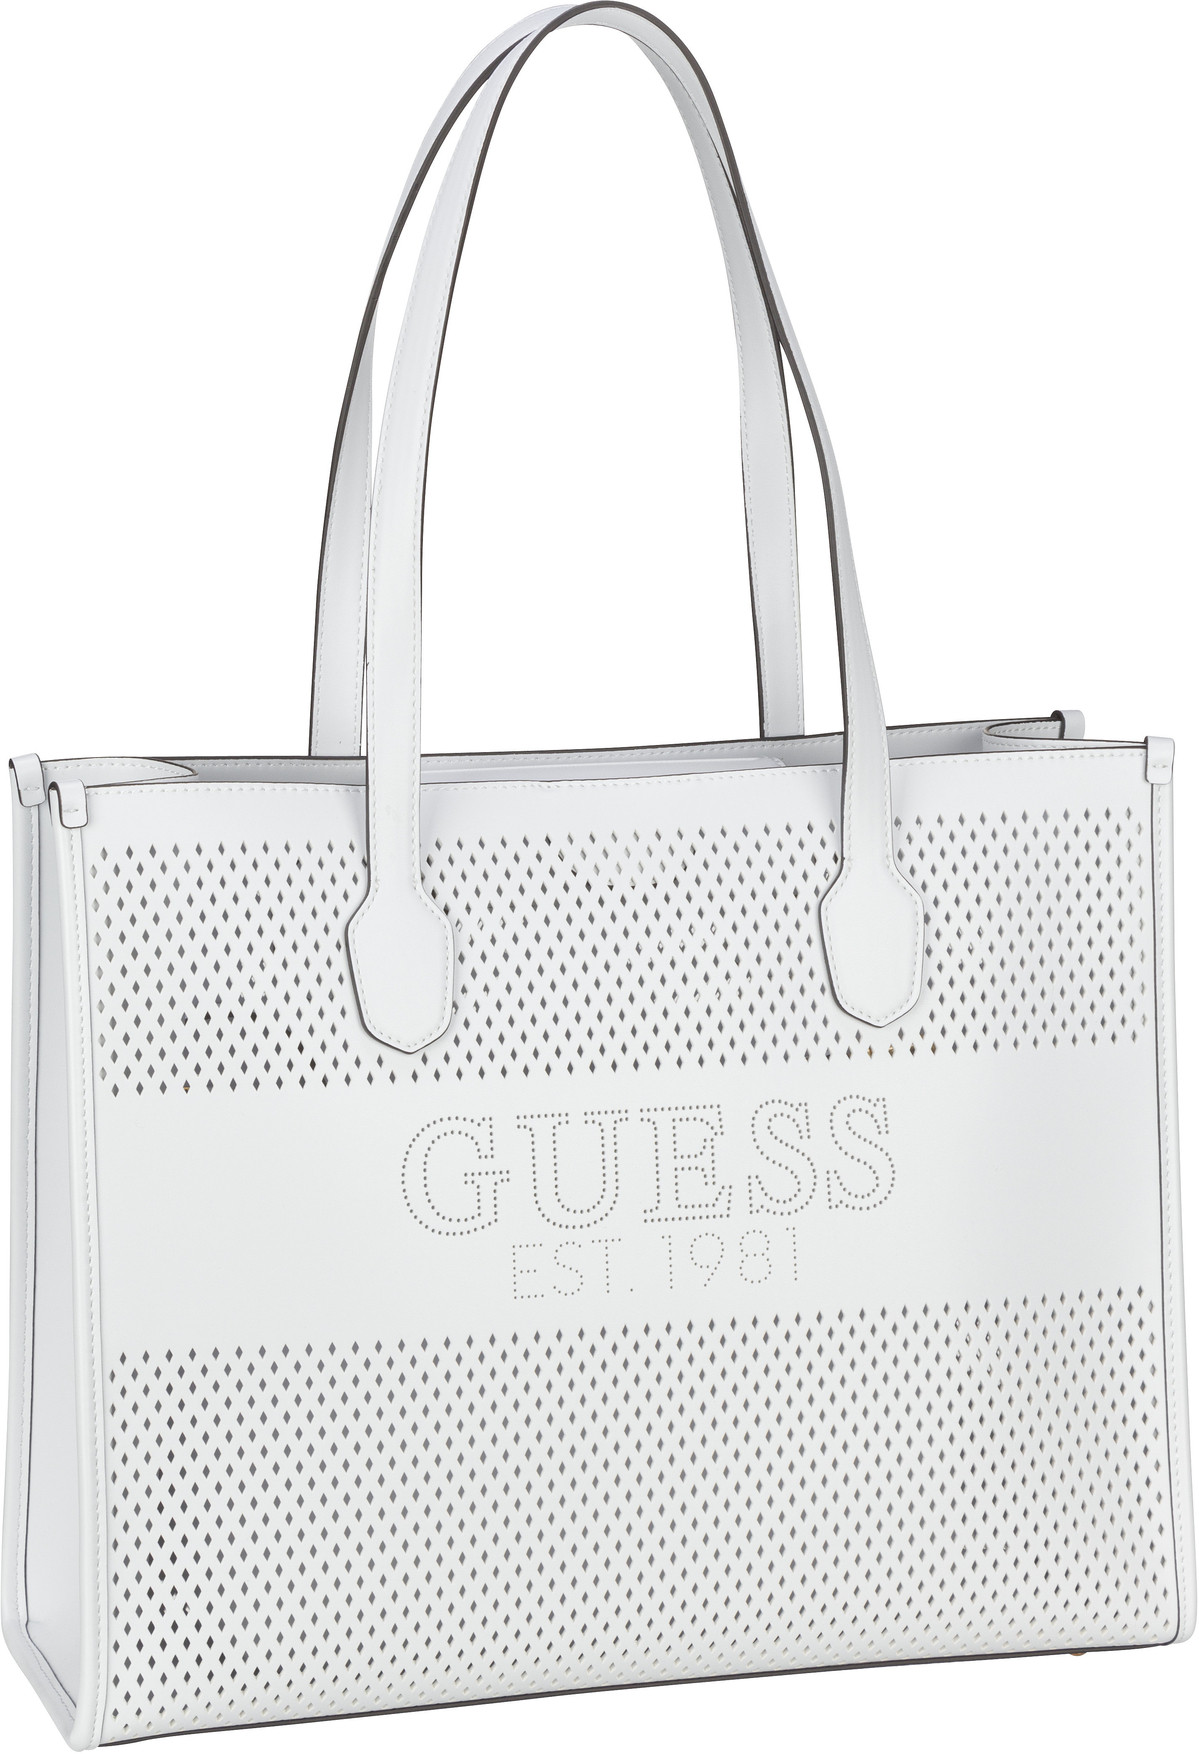 Guess Guess Katey Tote WH in Weiß (19.8 Liter), Shopper